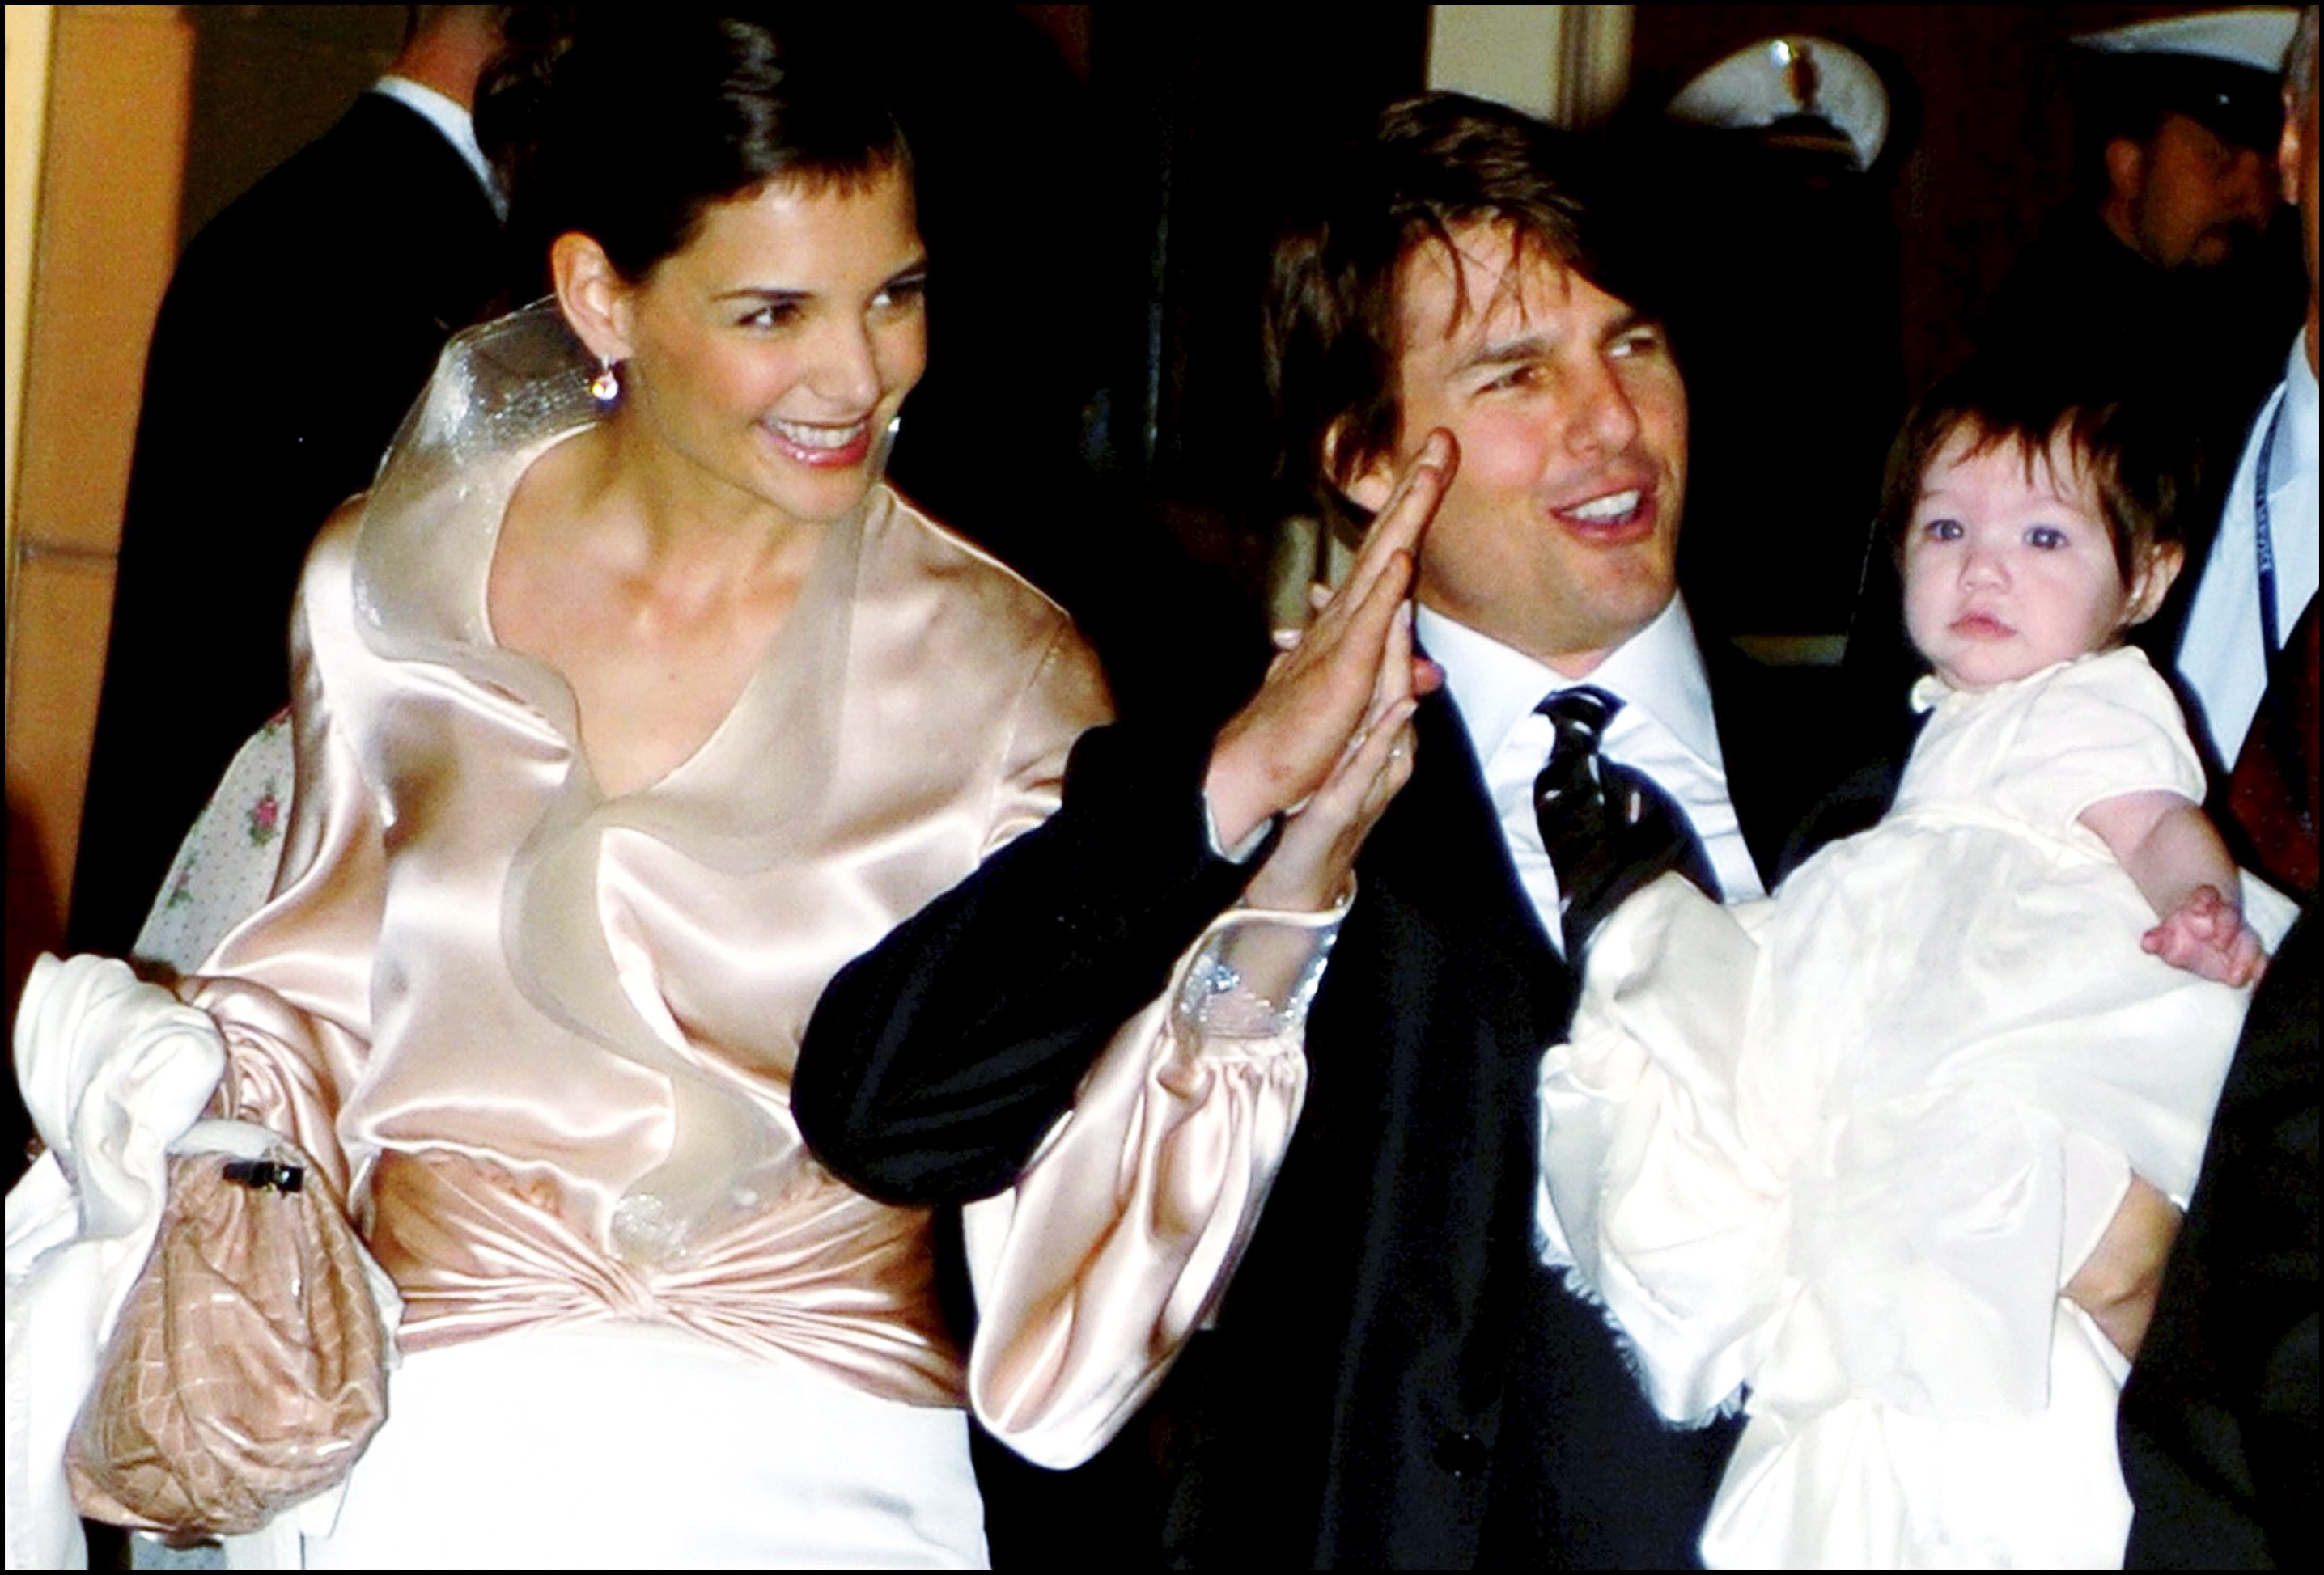 Tom Cruise, Katie Holmes, and Suri Cruise at the restaurant 'Nino' near plaza di Spagna in Rome, Italy on November 16, 2006. | Source: Getty Images